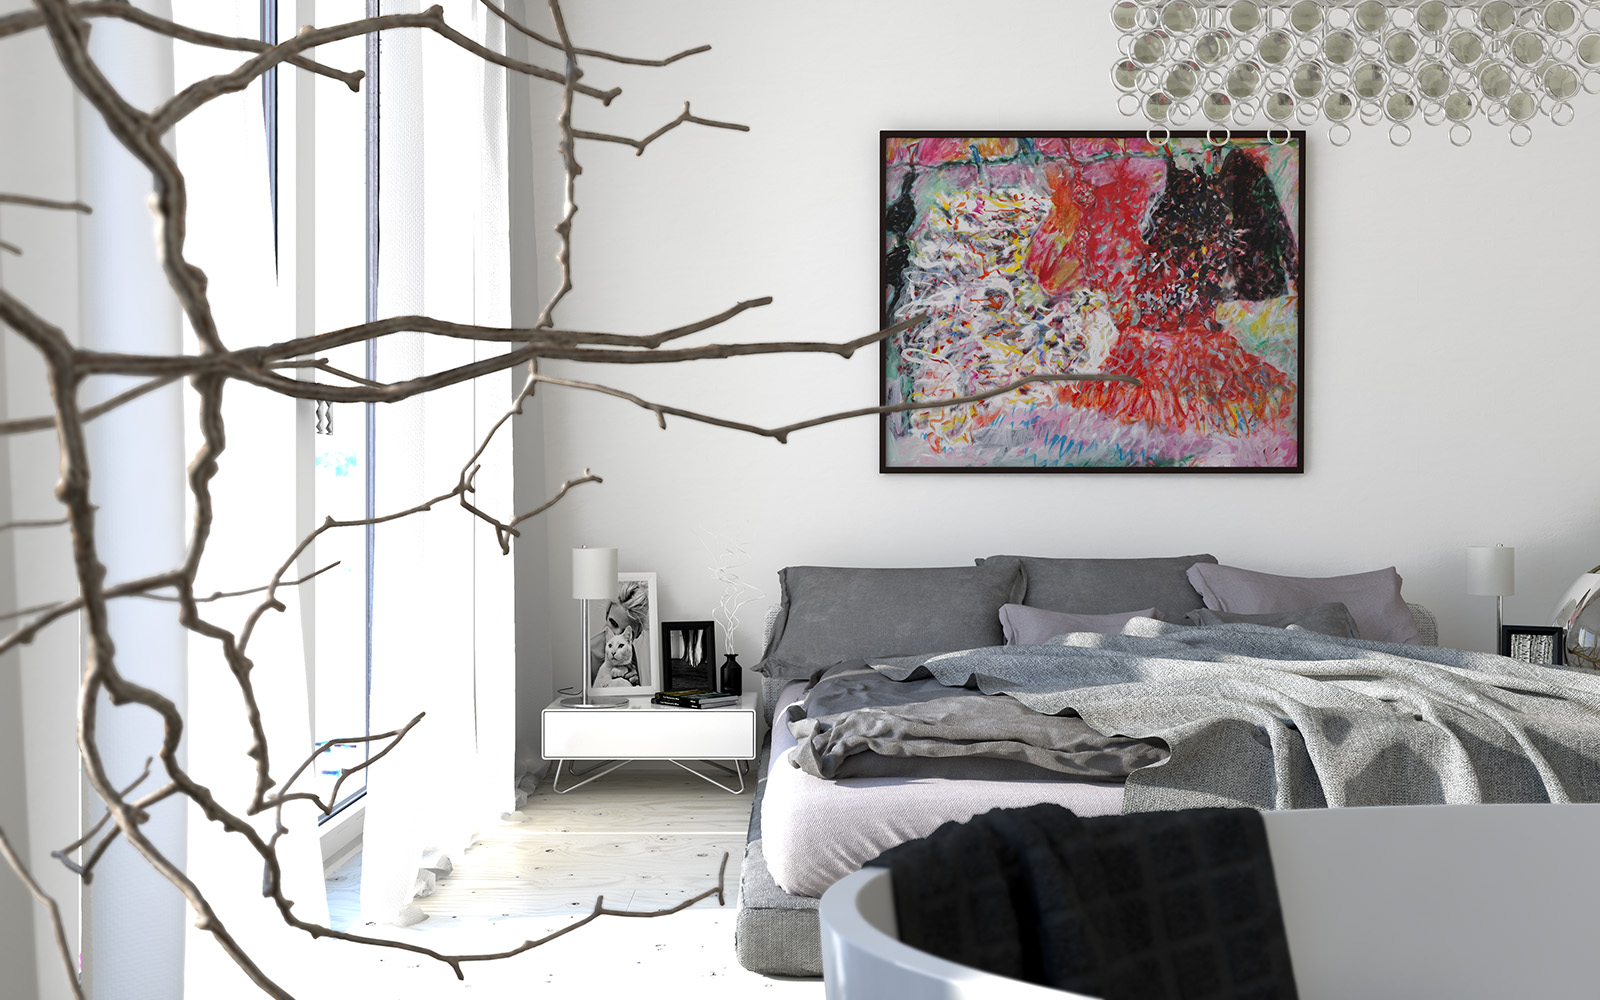 Bedroom wall decoration "width =" 1600 "height =" 1000 "srcset =" https://mileray.com/wp-content/uploads/2020/05/1588509554_76_Modern-Bedroom-Design-Ideas-With-Creative-Designs-Look-Fabulous.jpeg 1600w, https://mileray.com/ wp -content / uploads / 2016/08 / Juraj-Talcik-300x188.jpeg 300w, https://mileray.com/wp-content/uploads/2016/08/Juraj-Talcik-768x480.jpeg 768w, https: // myfashionos .com / wp-content / uploads / 2016/08 / Juraj-Talcik-1024x640.jpeg 1024w, https://mileray.com/wp-content/uploads/2016/08/Juraj-Talcik-696x435.jpeg 696w, https : //mileray.com/wp-content/uploads/2016/08/Juraj-Talcik-1068x668.jpeg 1068w, https://mileray.com/wp-content/uploads/2016/08/Juraj-Talcik-672x420. jpeg 672w "sizes =" (maximum width: 1600px) 100vw, 1600px